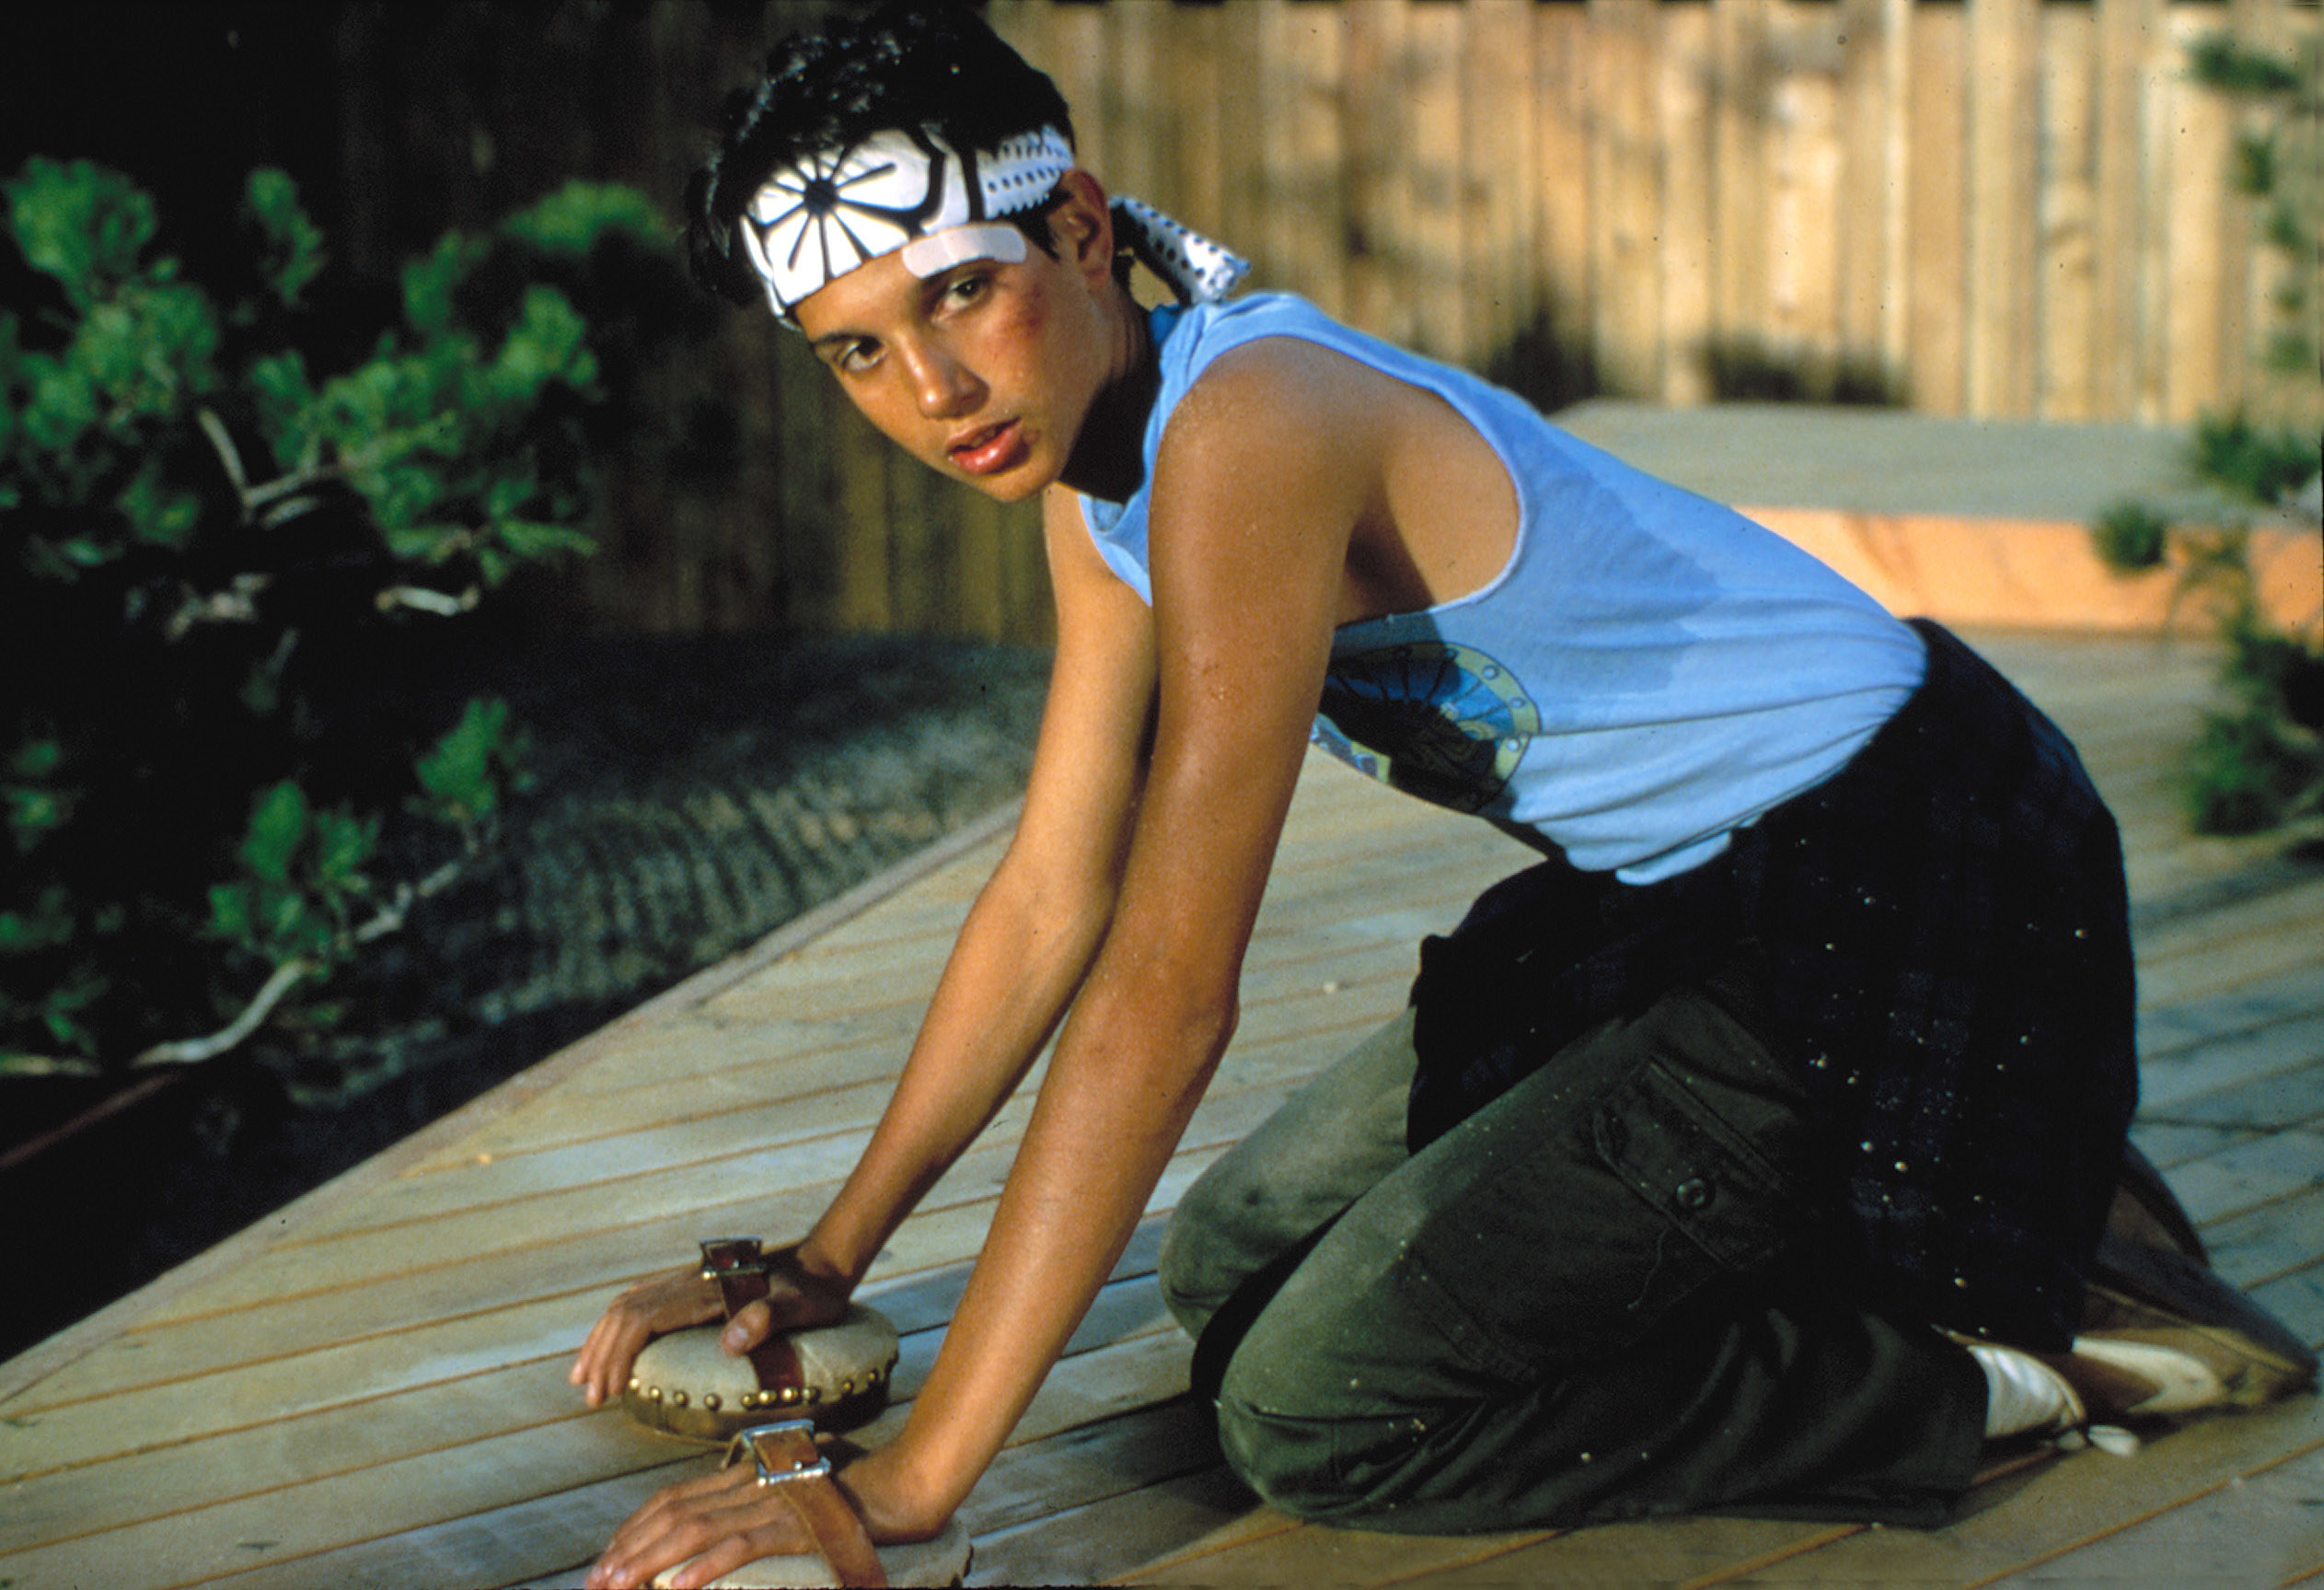 Ralph Macchio cleaning a deck in &quot;The Karate Kid&quot;